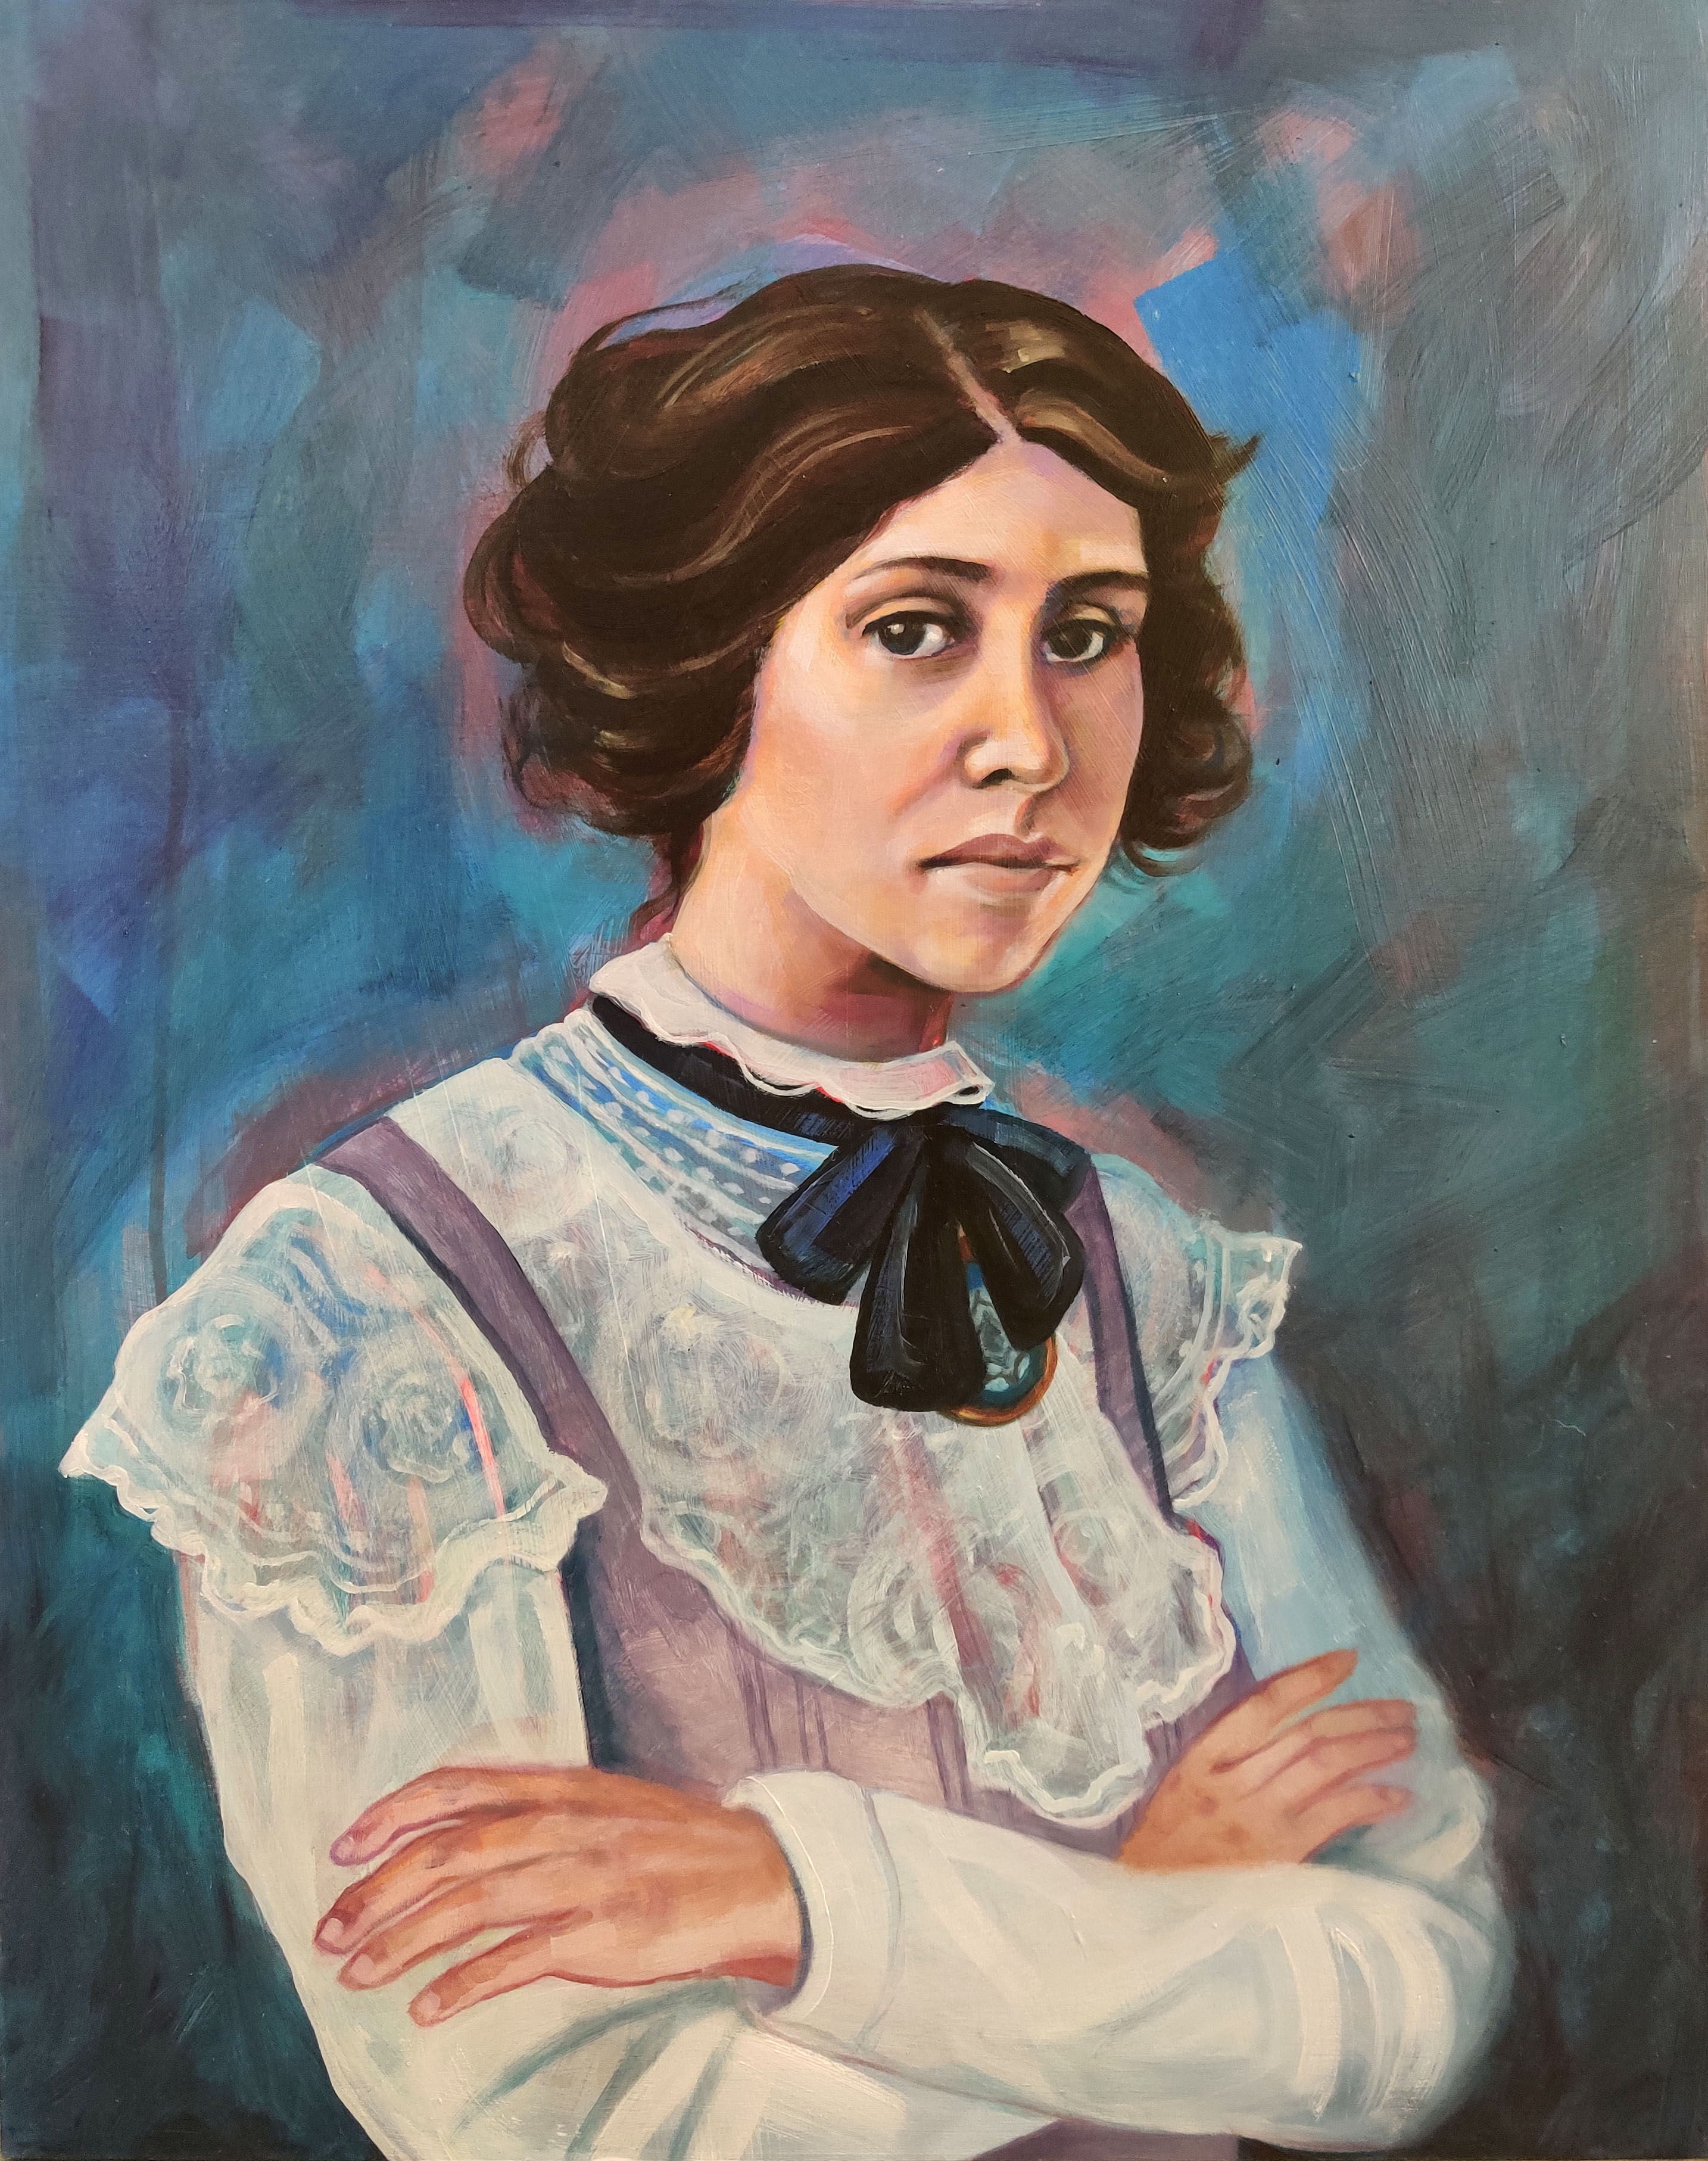 Painted portrait of woman in late 19th century North American clothing